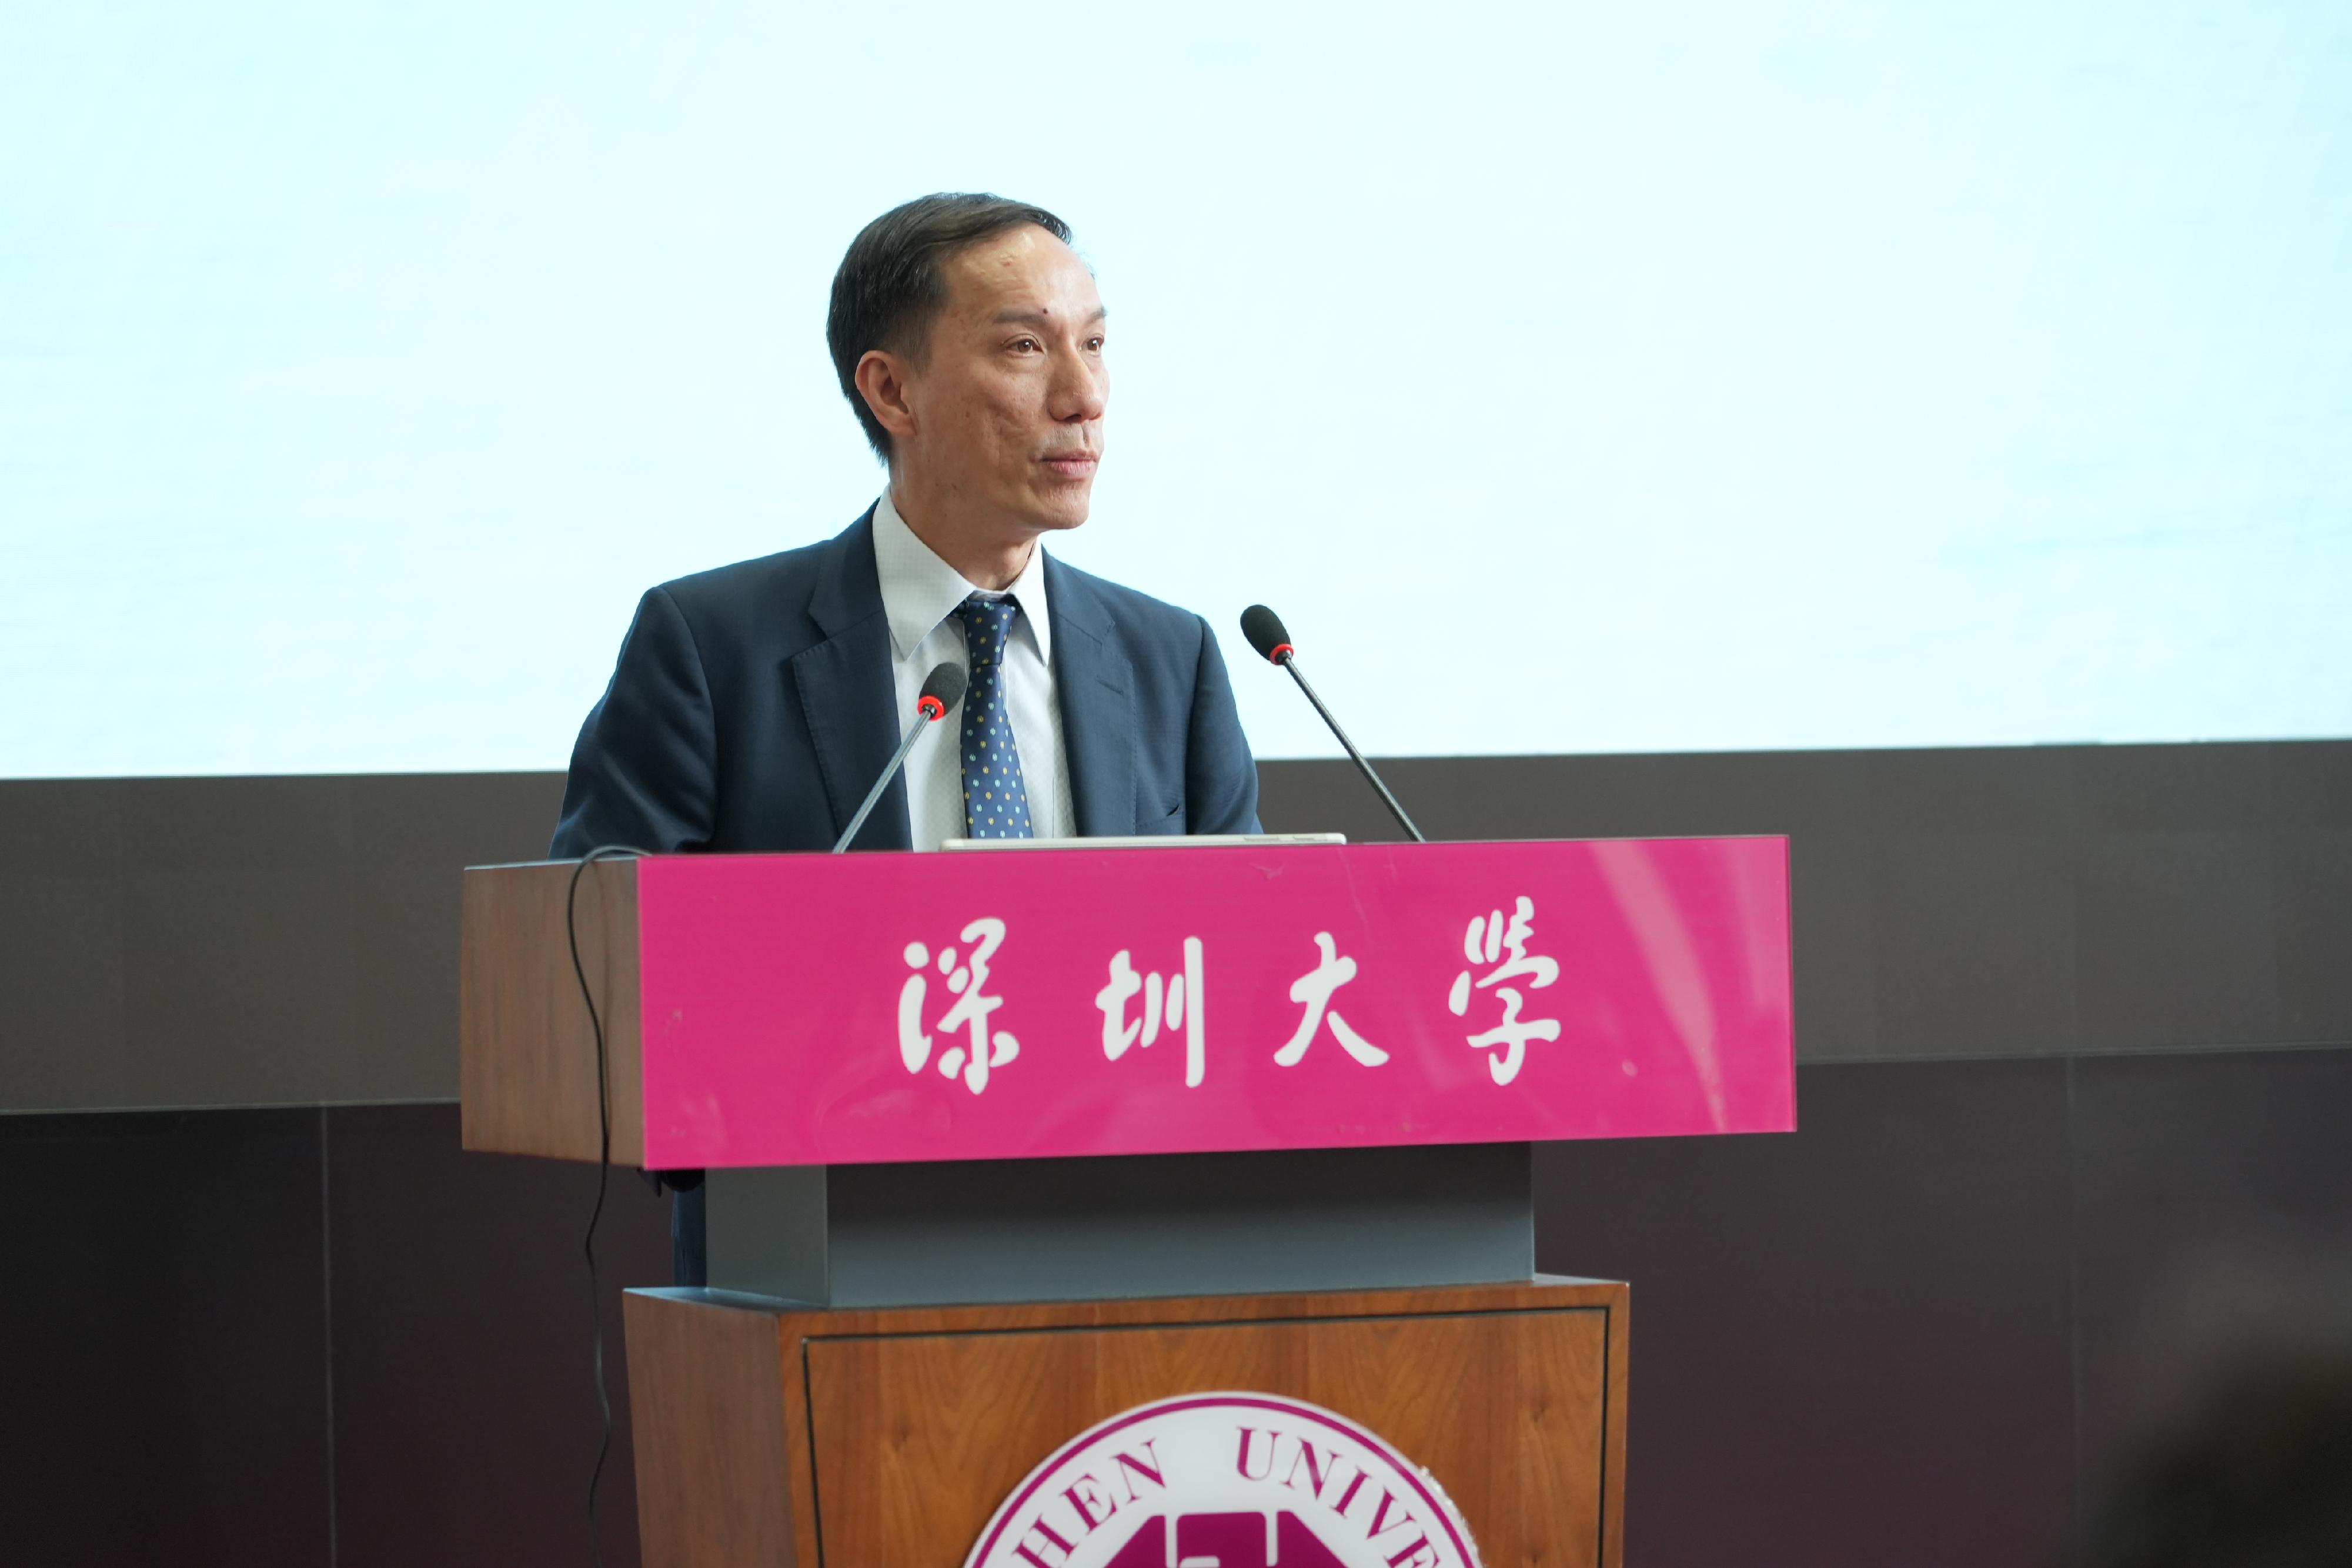 The Civil Service Bureau (CSB) led a delegation for the first time, together with representatives from the Civil Aviation Department, Civil Engineering and Development Department, Highways Department and Leisure and Cultural Services Department, to visit the campuses of Shenzhen University, Jinan University and Huaqiao University in Shenzhen, Guangzhou, Xiamen, and Quanzhou respectively, to conduct recruitment talks for three consecutive days starting today (May 27). Photo shows the Director of General Grades of the CSB, Mr Hermes Chan, introducing the diverse career opportunities provided by the Hong Kong Special Administrative Region Government at the recruitment talk at Shenzhen University today. He encouraged Hong Kong students with aspirations to serve the community to join the civil service.